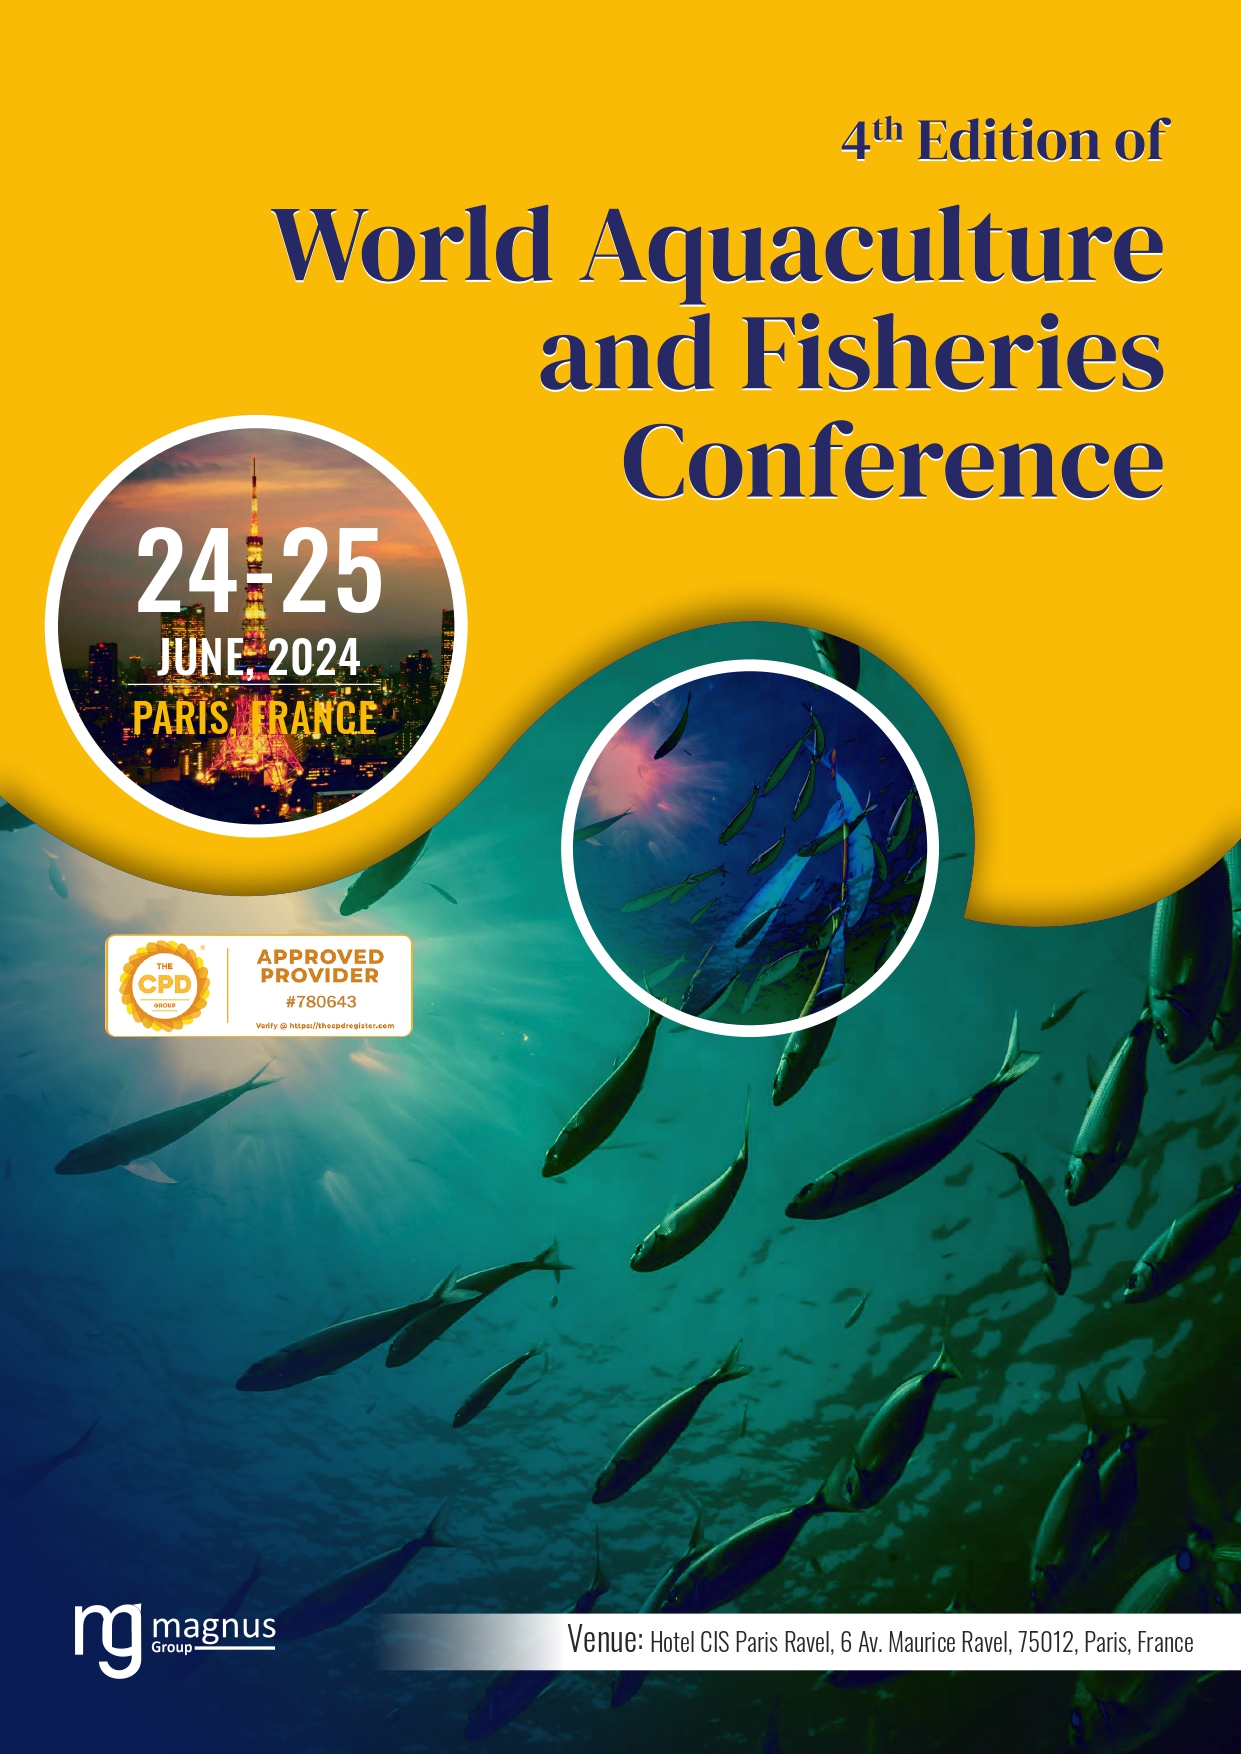 4th Edition of World Aquaculture and Fisheries Conference | Paris, France Book